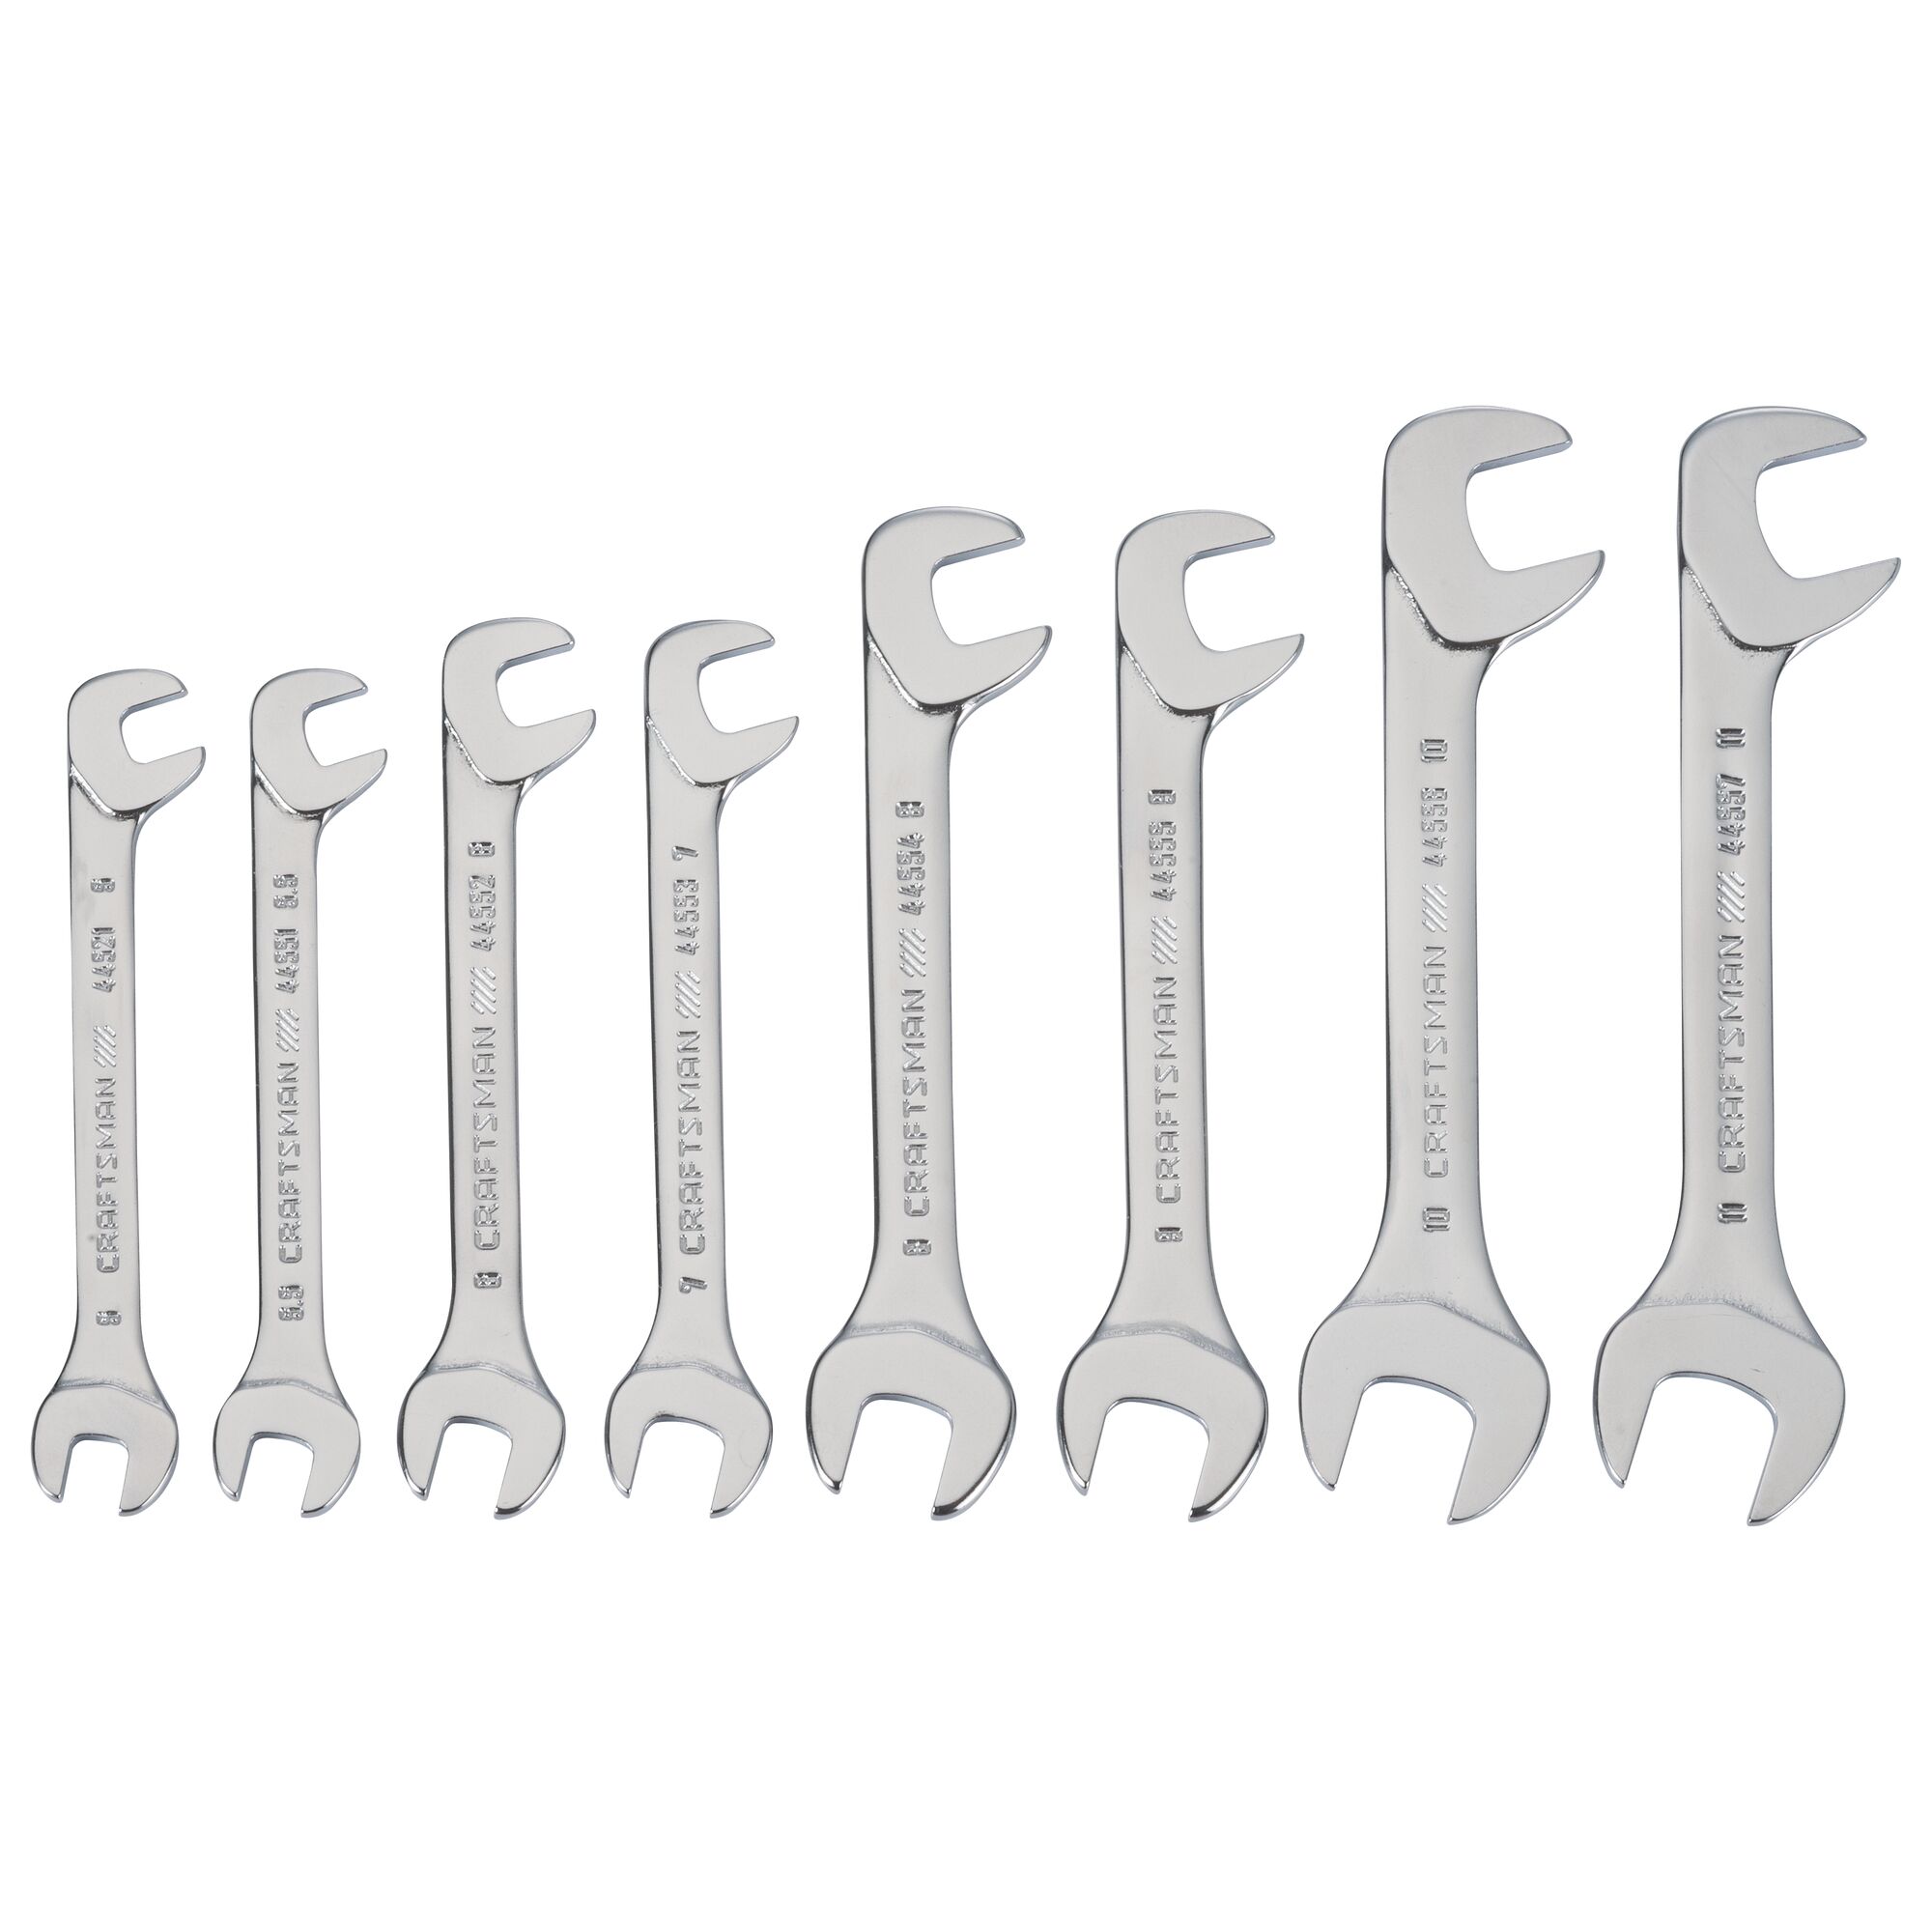 Profile of craftsman 8 piece metric open end wrench set.